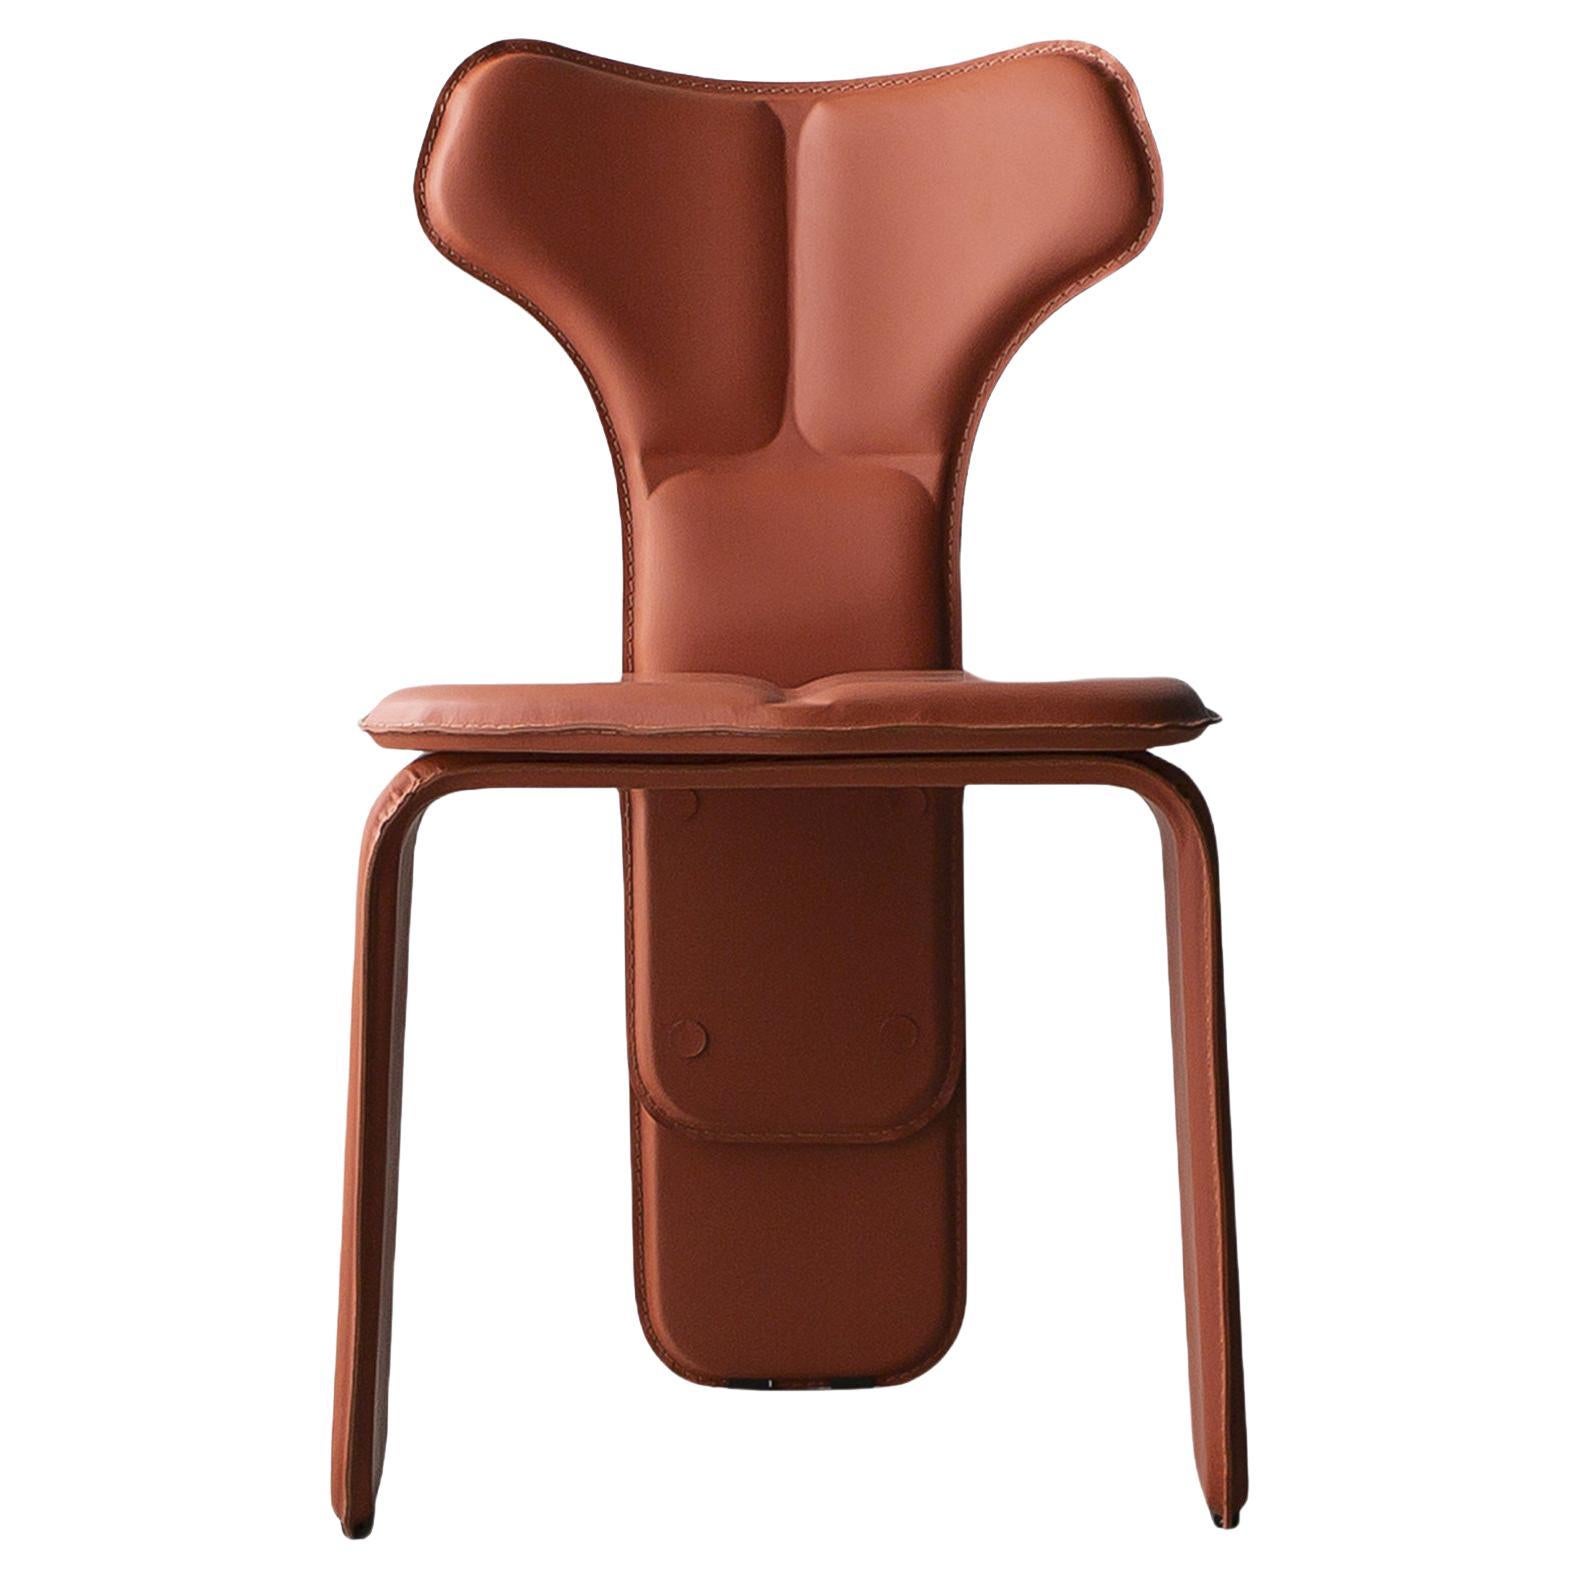 Fly chair in leather by Tiago Curioni, Brazilian contemporary design For Sale